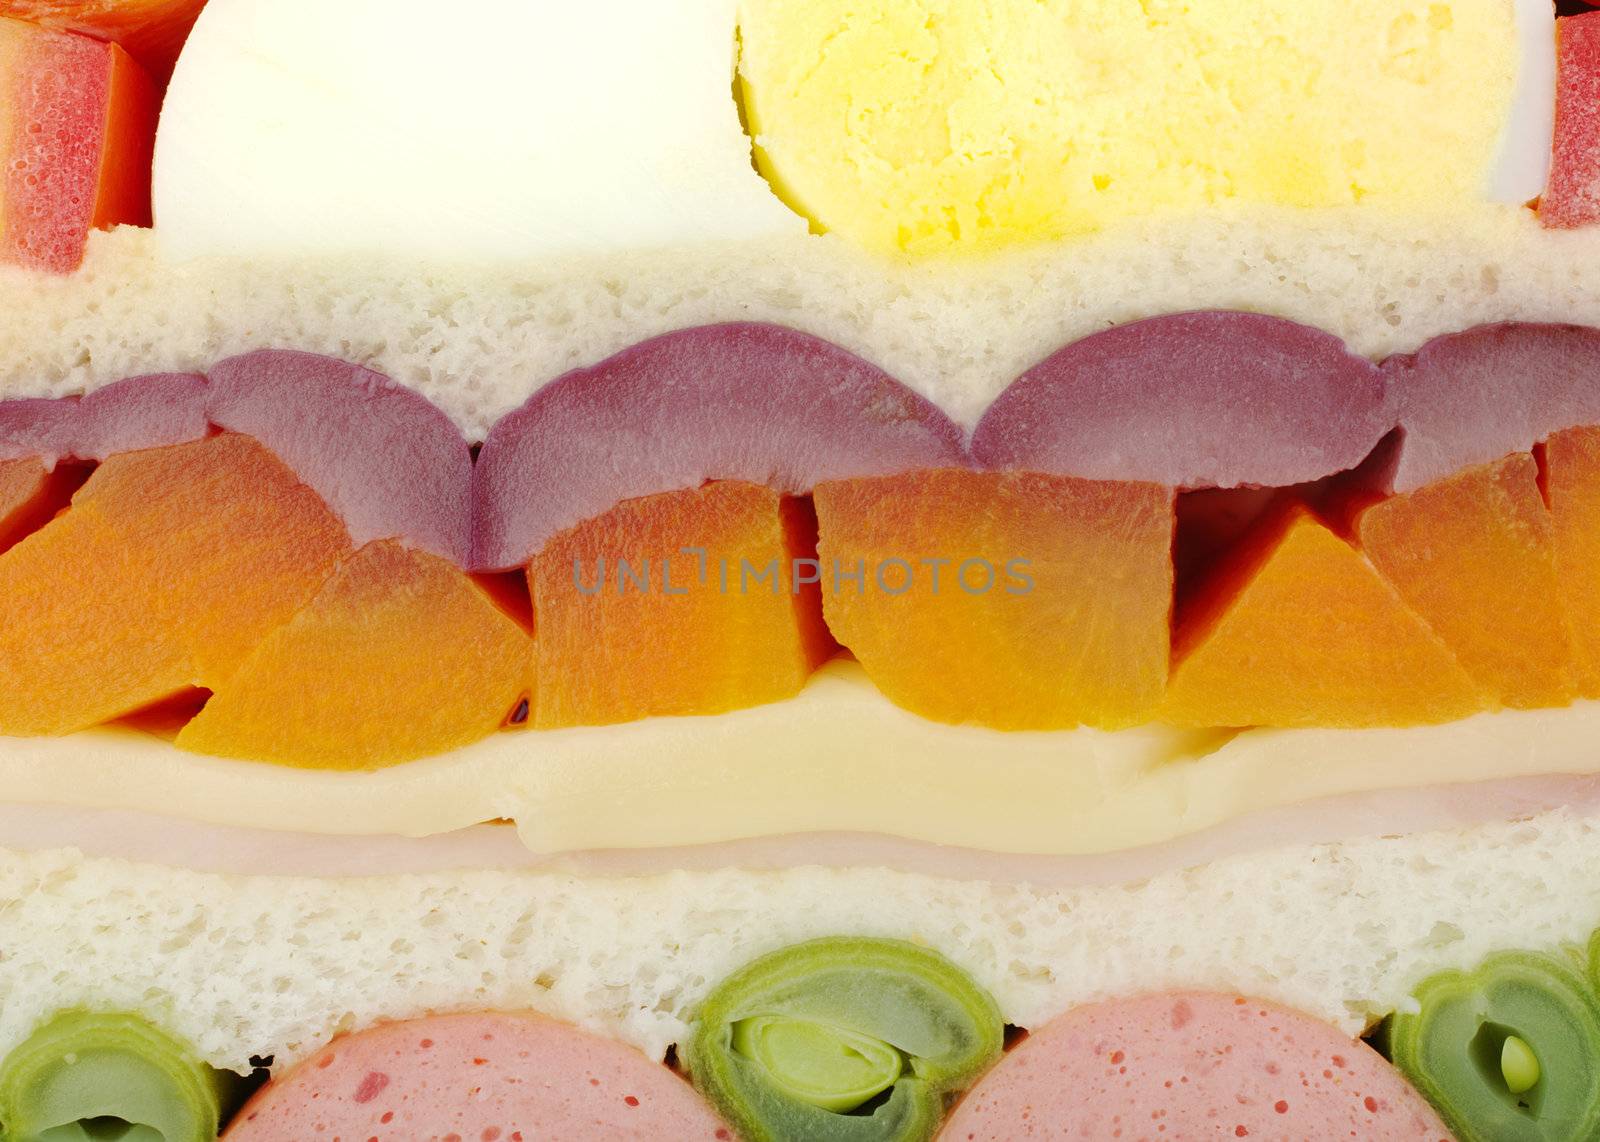 Cross section close-up of a multilayered sandwich with various indegredients.